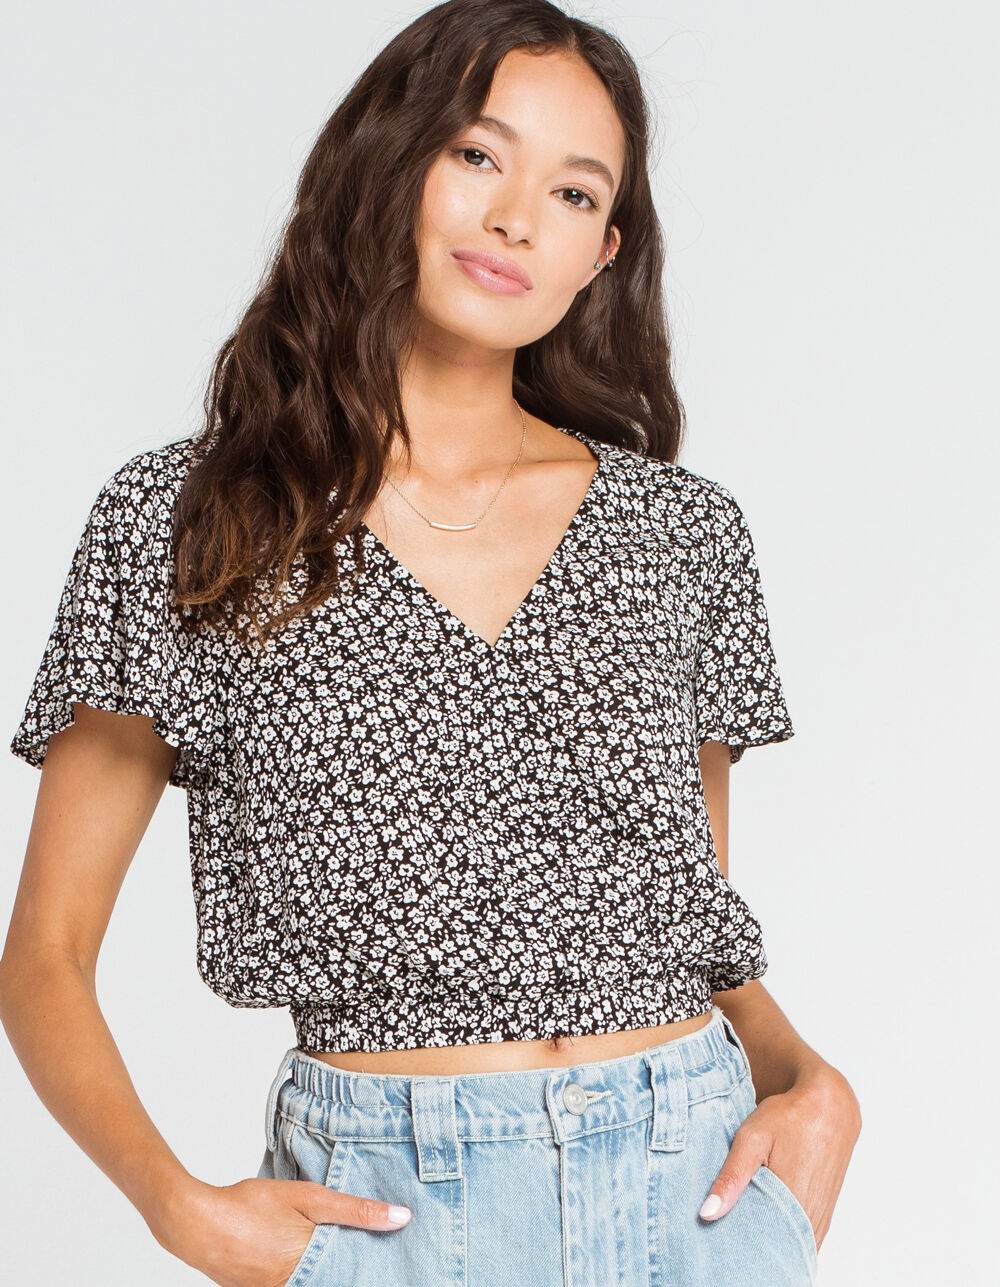 SKY AND SPARROW Flutter Sleeve Womens Wrap Top - BLACK/WHITE | Tillys